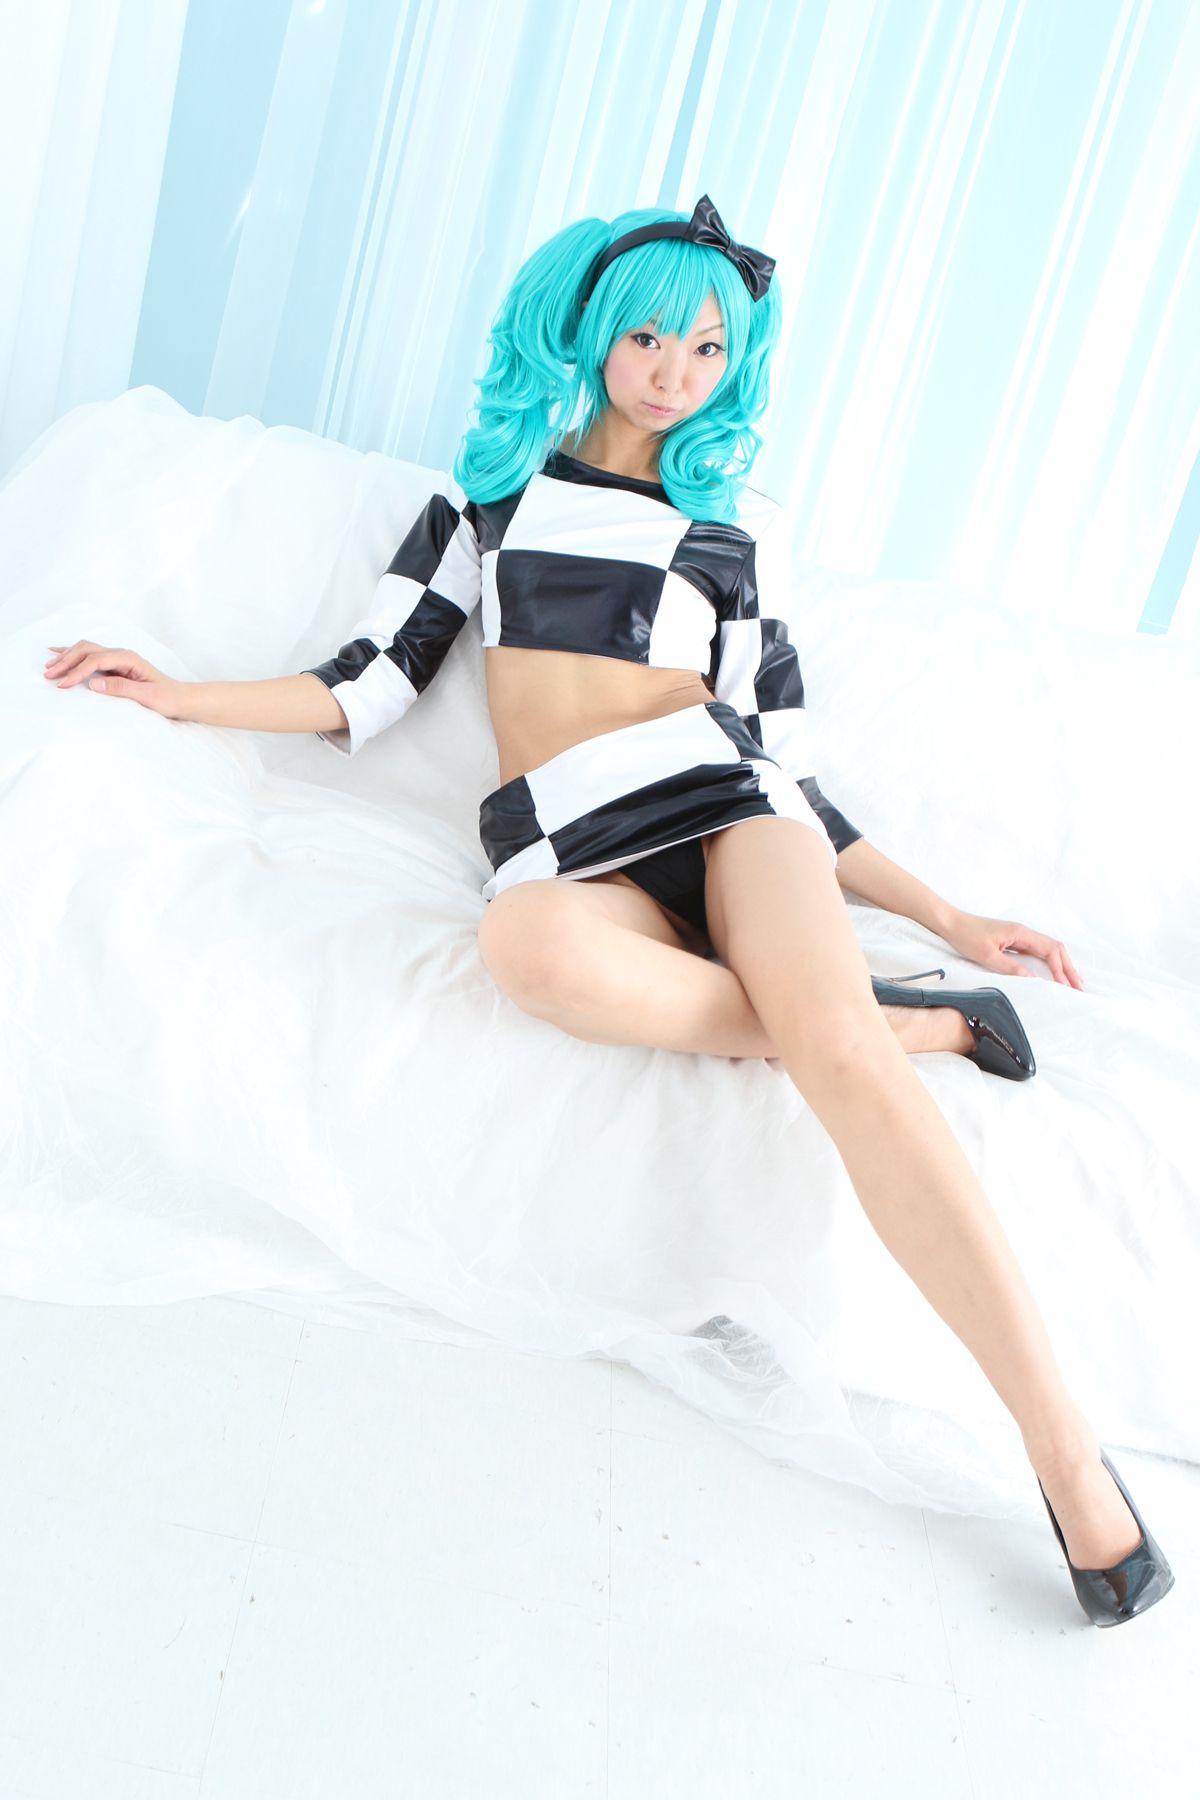 taotuhome[Cosplay套图] New Hatsune Miku from Vocaloid - So Sexy第12张